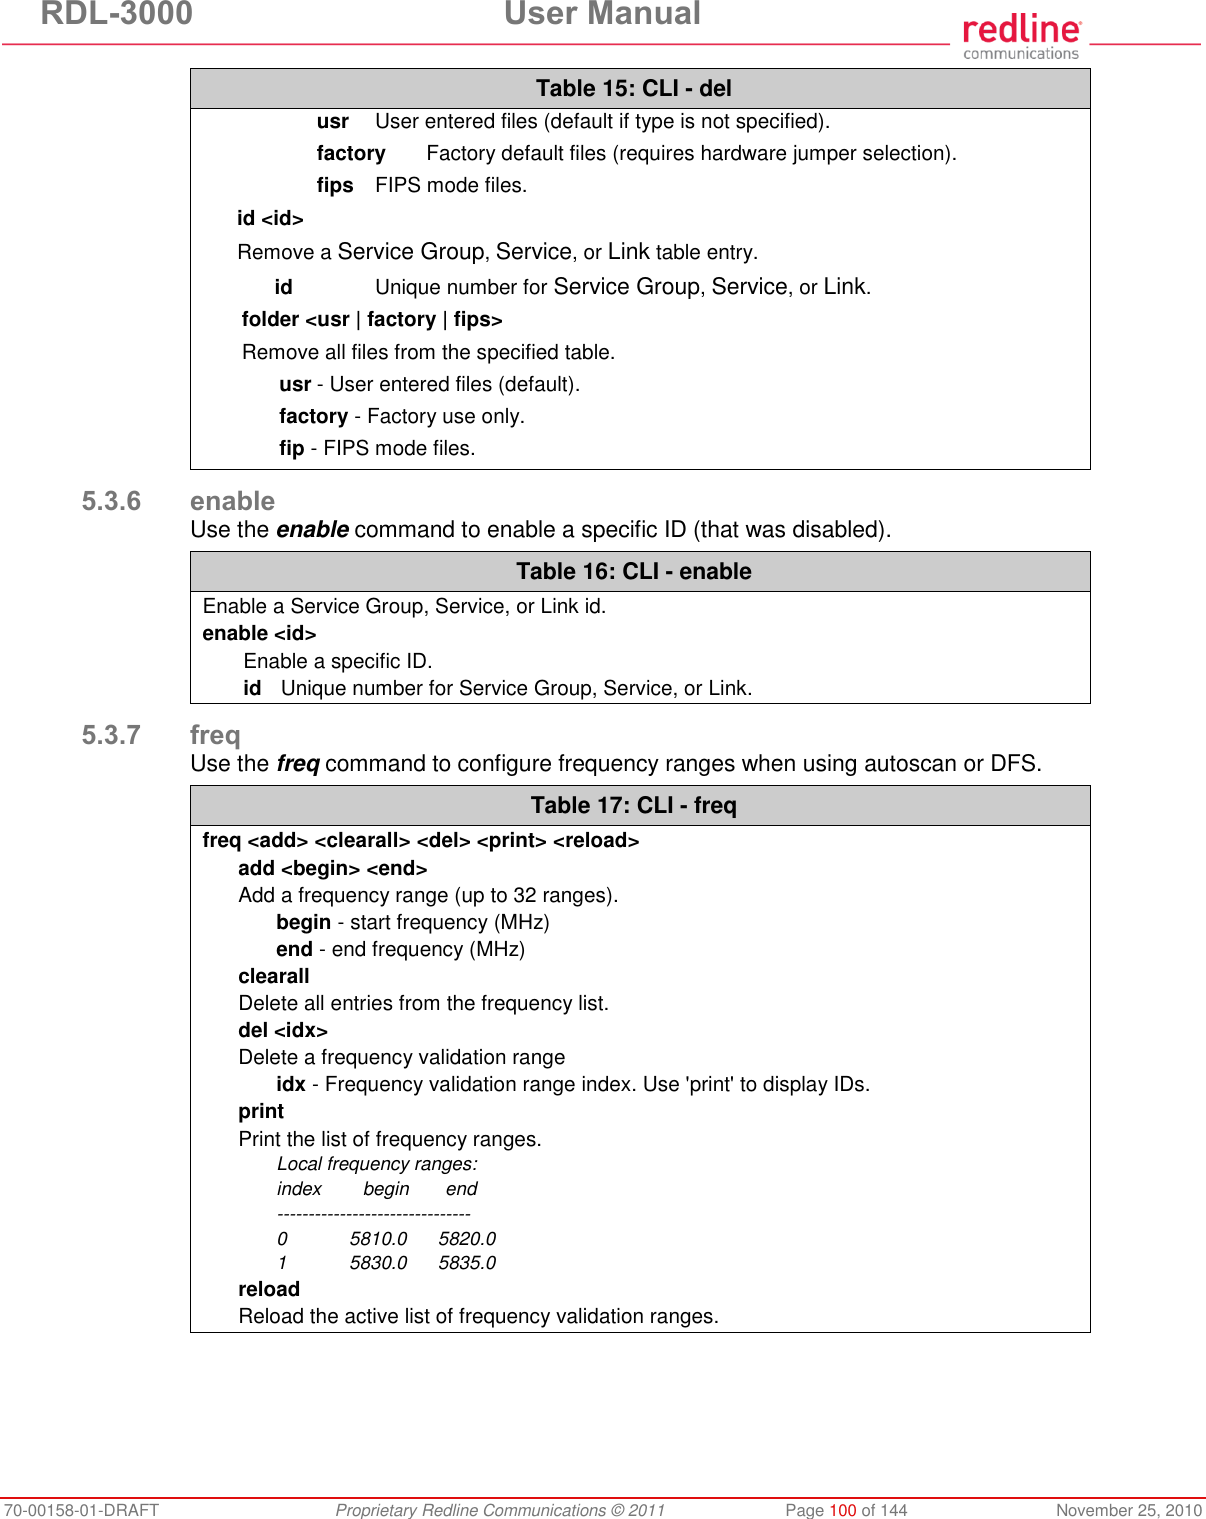 RDL-3000  User Manual 70-00158-01-DRAFT  Proprietary Redline Communications © 2011  Page 100 of 144  November 25, 2010 Table 15: CLI - del  usr  User entered files (default if type is not specified).  factory Factory default files (requires hardware jumper selection).  fips  FIPS mode files.  id &lt;id&gt; Remove a Service Group, Service, or Link table entry.  id  Unique number for Service Group, Service, or Link. folder &lt;usr | factory | fips&gt; Remove all files from the specified table. usr - User entered files (default). factory - Factory use only. fip - FIPS mode files.  5.3.6 enable Use the enable command to enable a specific ID (that was disabled). Table 16: CLI - enable Enable a Service Group, Service, or Link id. enable &lt;id&gt; Enable a specific ID. id  Unique number for Service Group, Service, or Link.  5.3.7 freq Use the freq command to configure frequency ranges when using autoscan or DFS. Table 17: CLI - freq freq &lt;add&gt; &lt;clearall&gt; &lt;del&gt; &lt;print&gt; &lt;reload&gt; add &lt;begin&gt; &lt;end&gt; Add a frequency range (up to 32 ranges).  begin - start frequency (MHz)  end - end frequency (MHz) clearall Delete all entries from the frequency list. del &lt;idx&gt; Delete a frequency validation range  idx - Frequency validation range index. Use &apos;print&apos; to display IDs. print Print the list of frequency ranges.   Local frequency ranges:   index        begin       end  -------------------------------   0            5810.0      5820.0   1            5830.0      5835.0 reload Reload the active list of frequency validation ranges.    